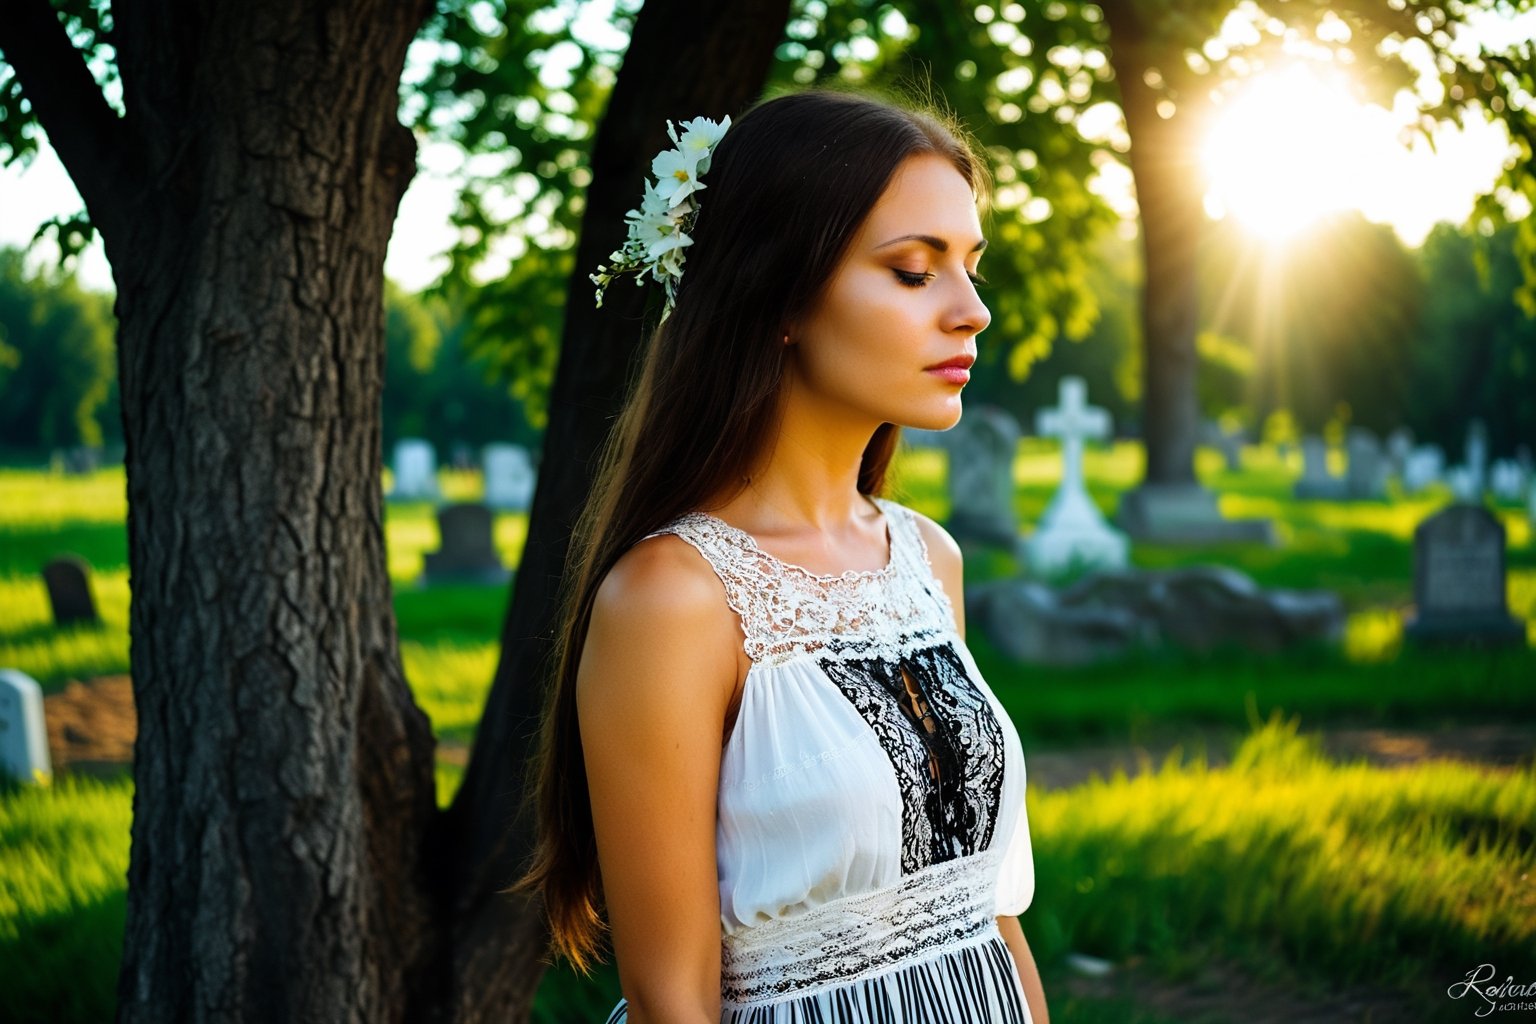 Photo. Profile of a Ukrainian woman in a lace summer dress. She is standing beside a tree with her eyes closed, facing the morning sun. The background is a cemetery.
BREAK
Picture of a Ukrainian woman in a lace summer dress, in profile. She is beside a tree, eyes closed, basking in the morning sun. A cemetery is in the background.
BREAK
Image of a Ukrainian woman wearing a lace summer dress. In profile, she faces the morning sun with eyes closed, next to a tree. The background reveals a cemetery.
BREAK
Snapshot of a Ukrainian woman in a lace summer dress, shown in profile. She stands by a tree, eyes closed, soaking in the morning sun, with a cemetery behind her.
BREAK
Photograph of a Ukrainian woman in a lace summer dress, profile view. She is near a tree, eyes closed, facing the morning sun. The background features a cemetery.